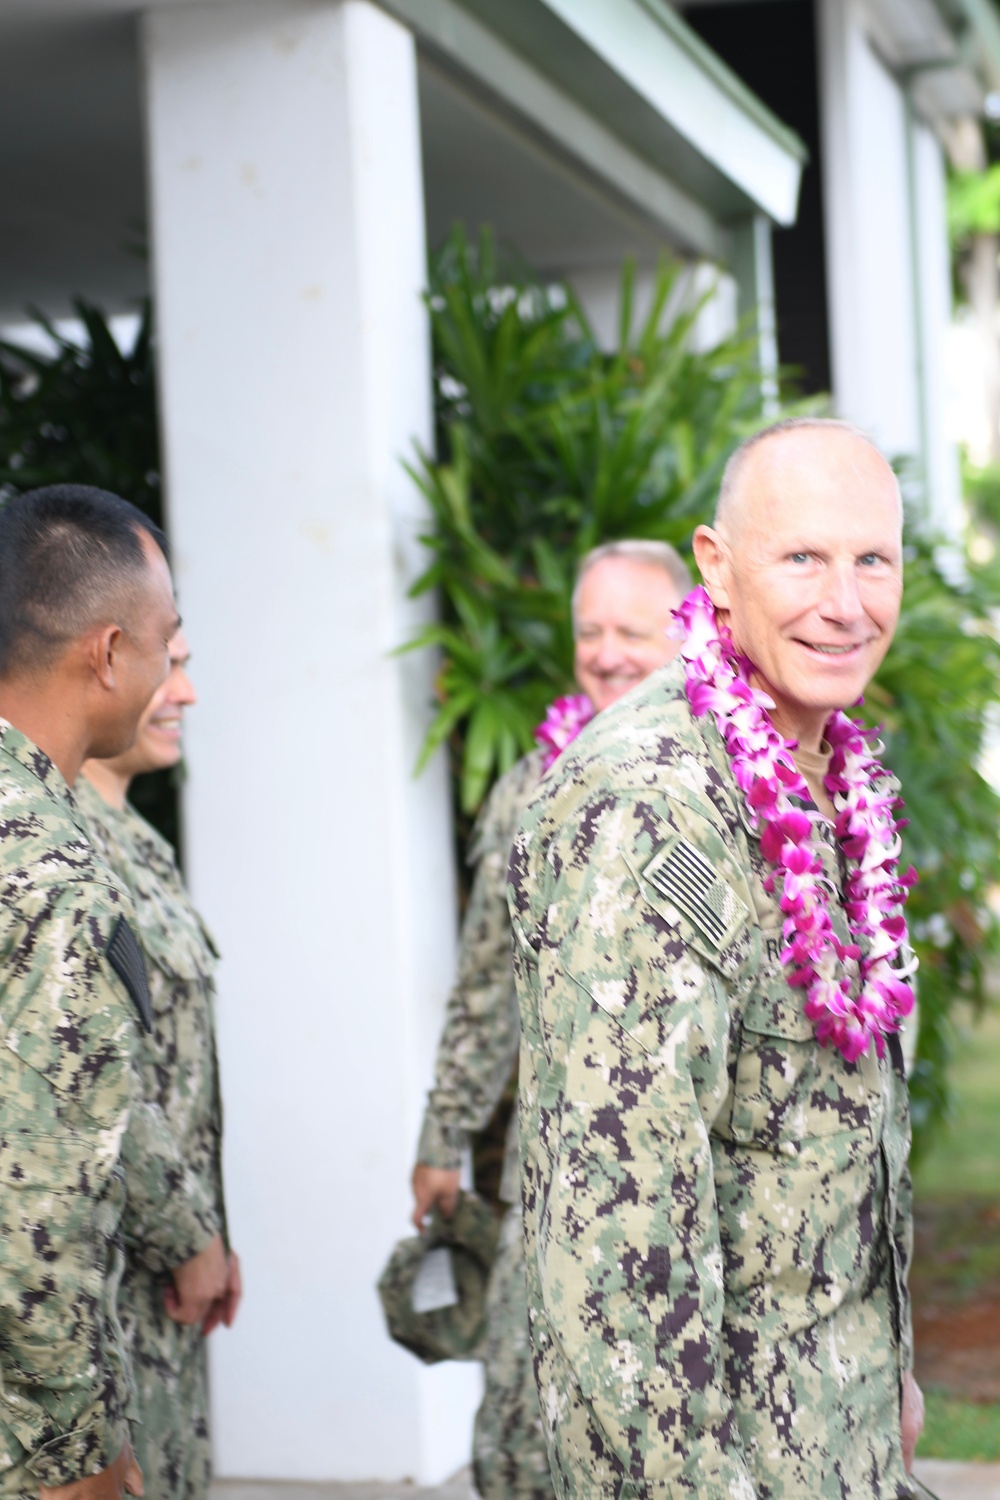 Acting Navy Surgeon General, Rear Adm. Darin K. Via, and Force Master Chief Michael J. Roberts, director of the Hospital Corps (NMRTC)